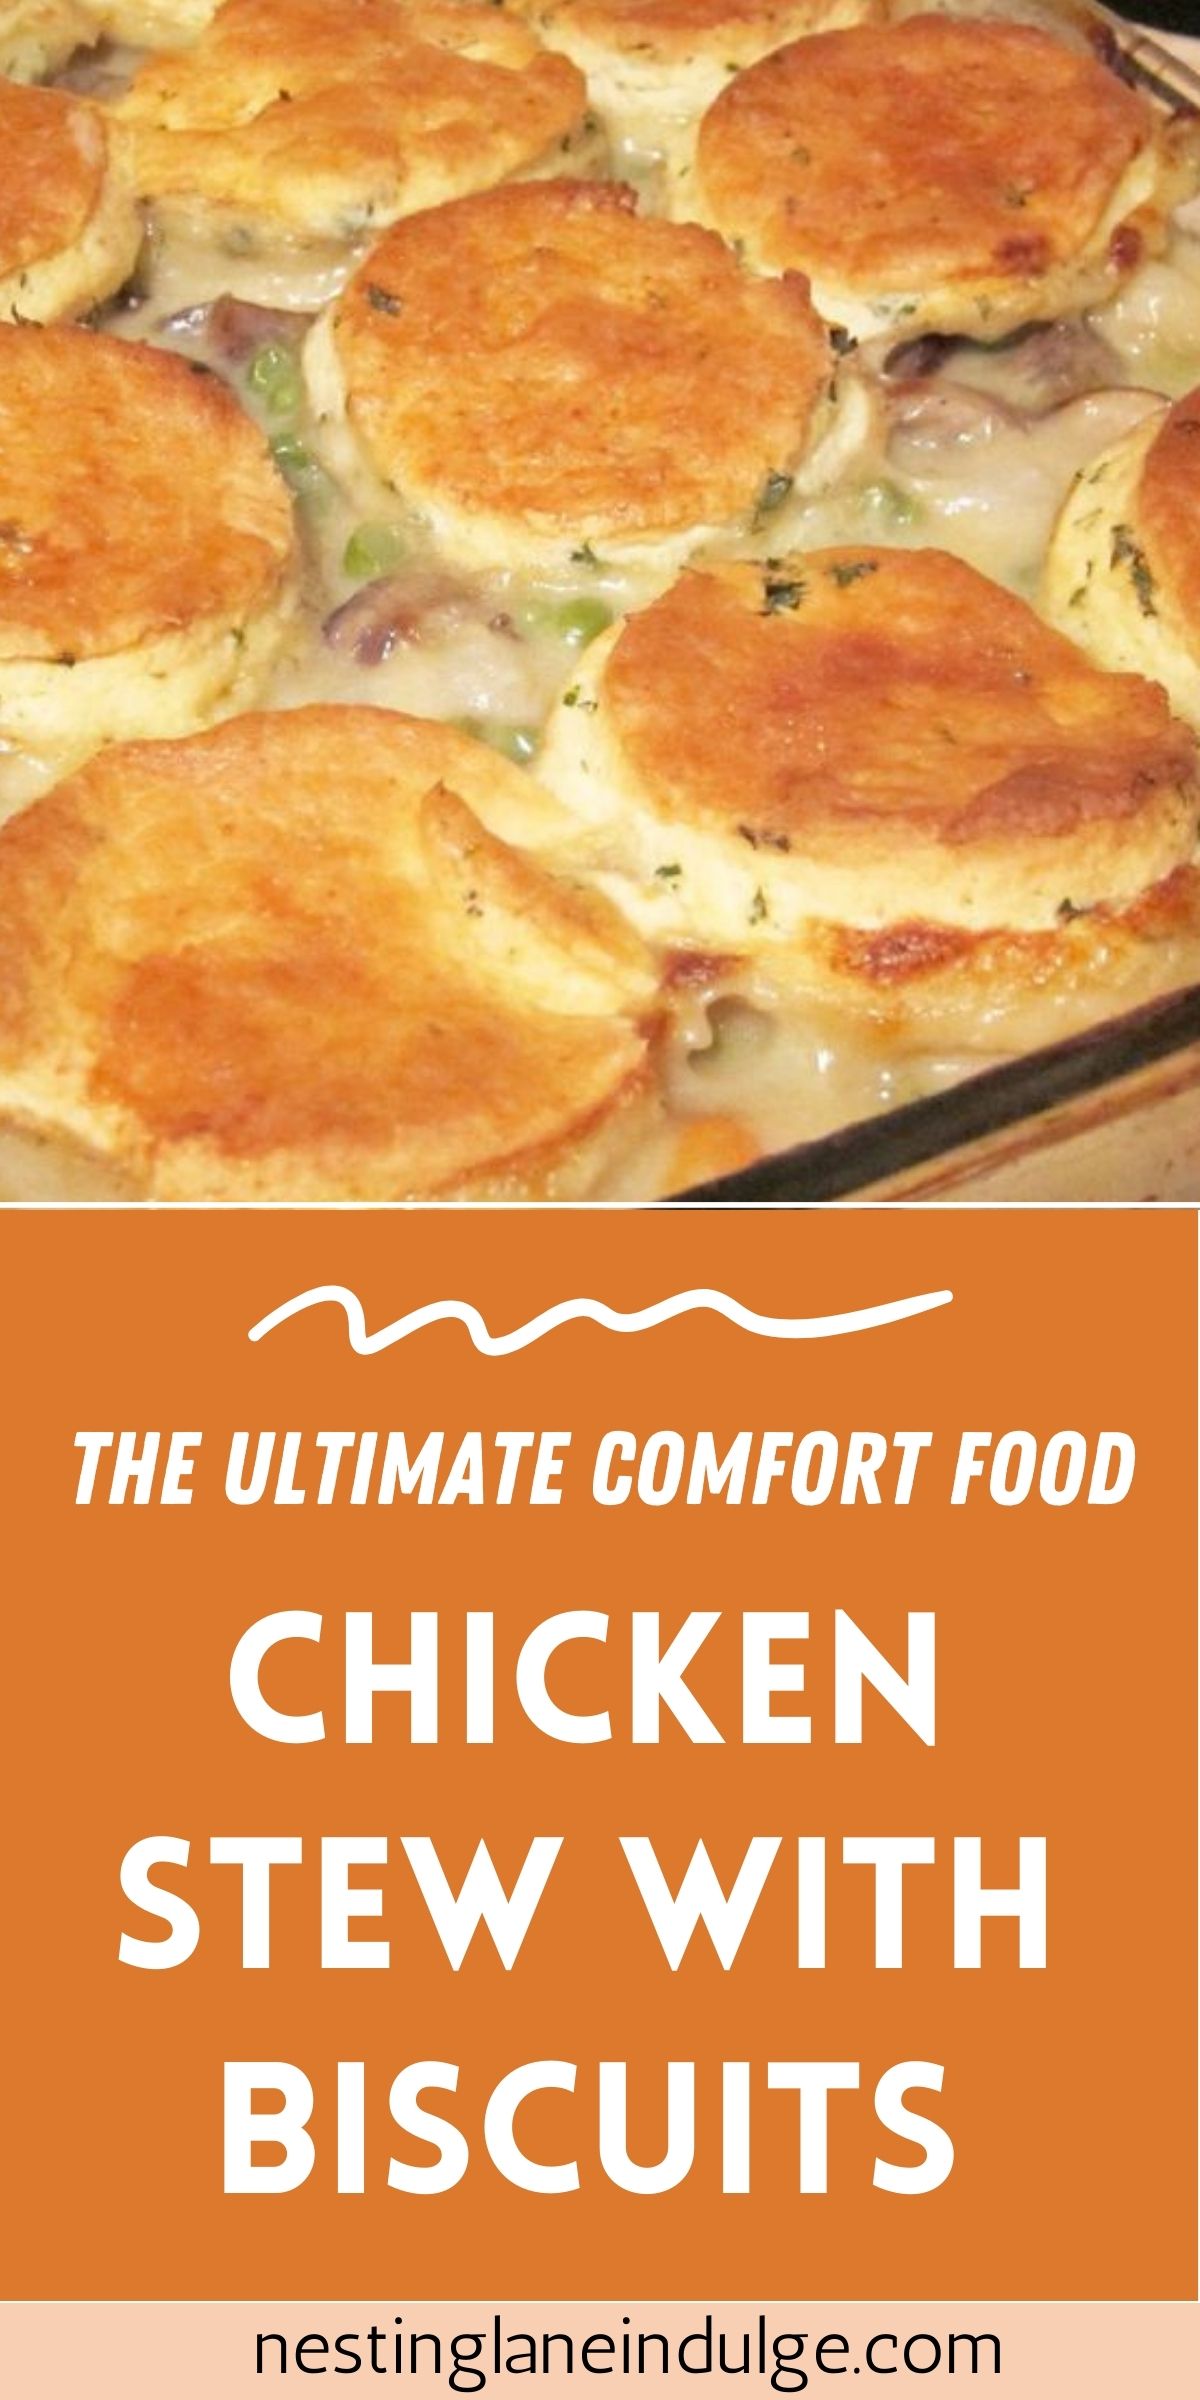 Graphic for Pinterest of Chicken Stew with Biscuits (The Ultimate Comfort Food) Recipe.